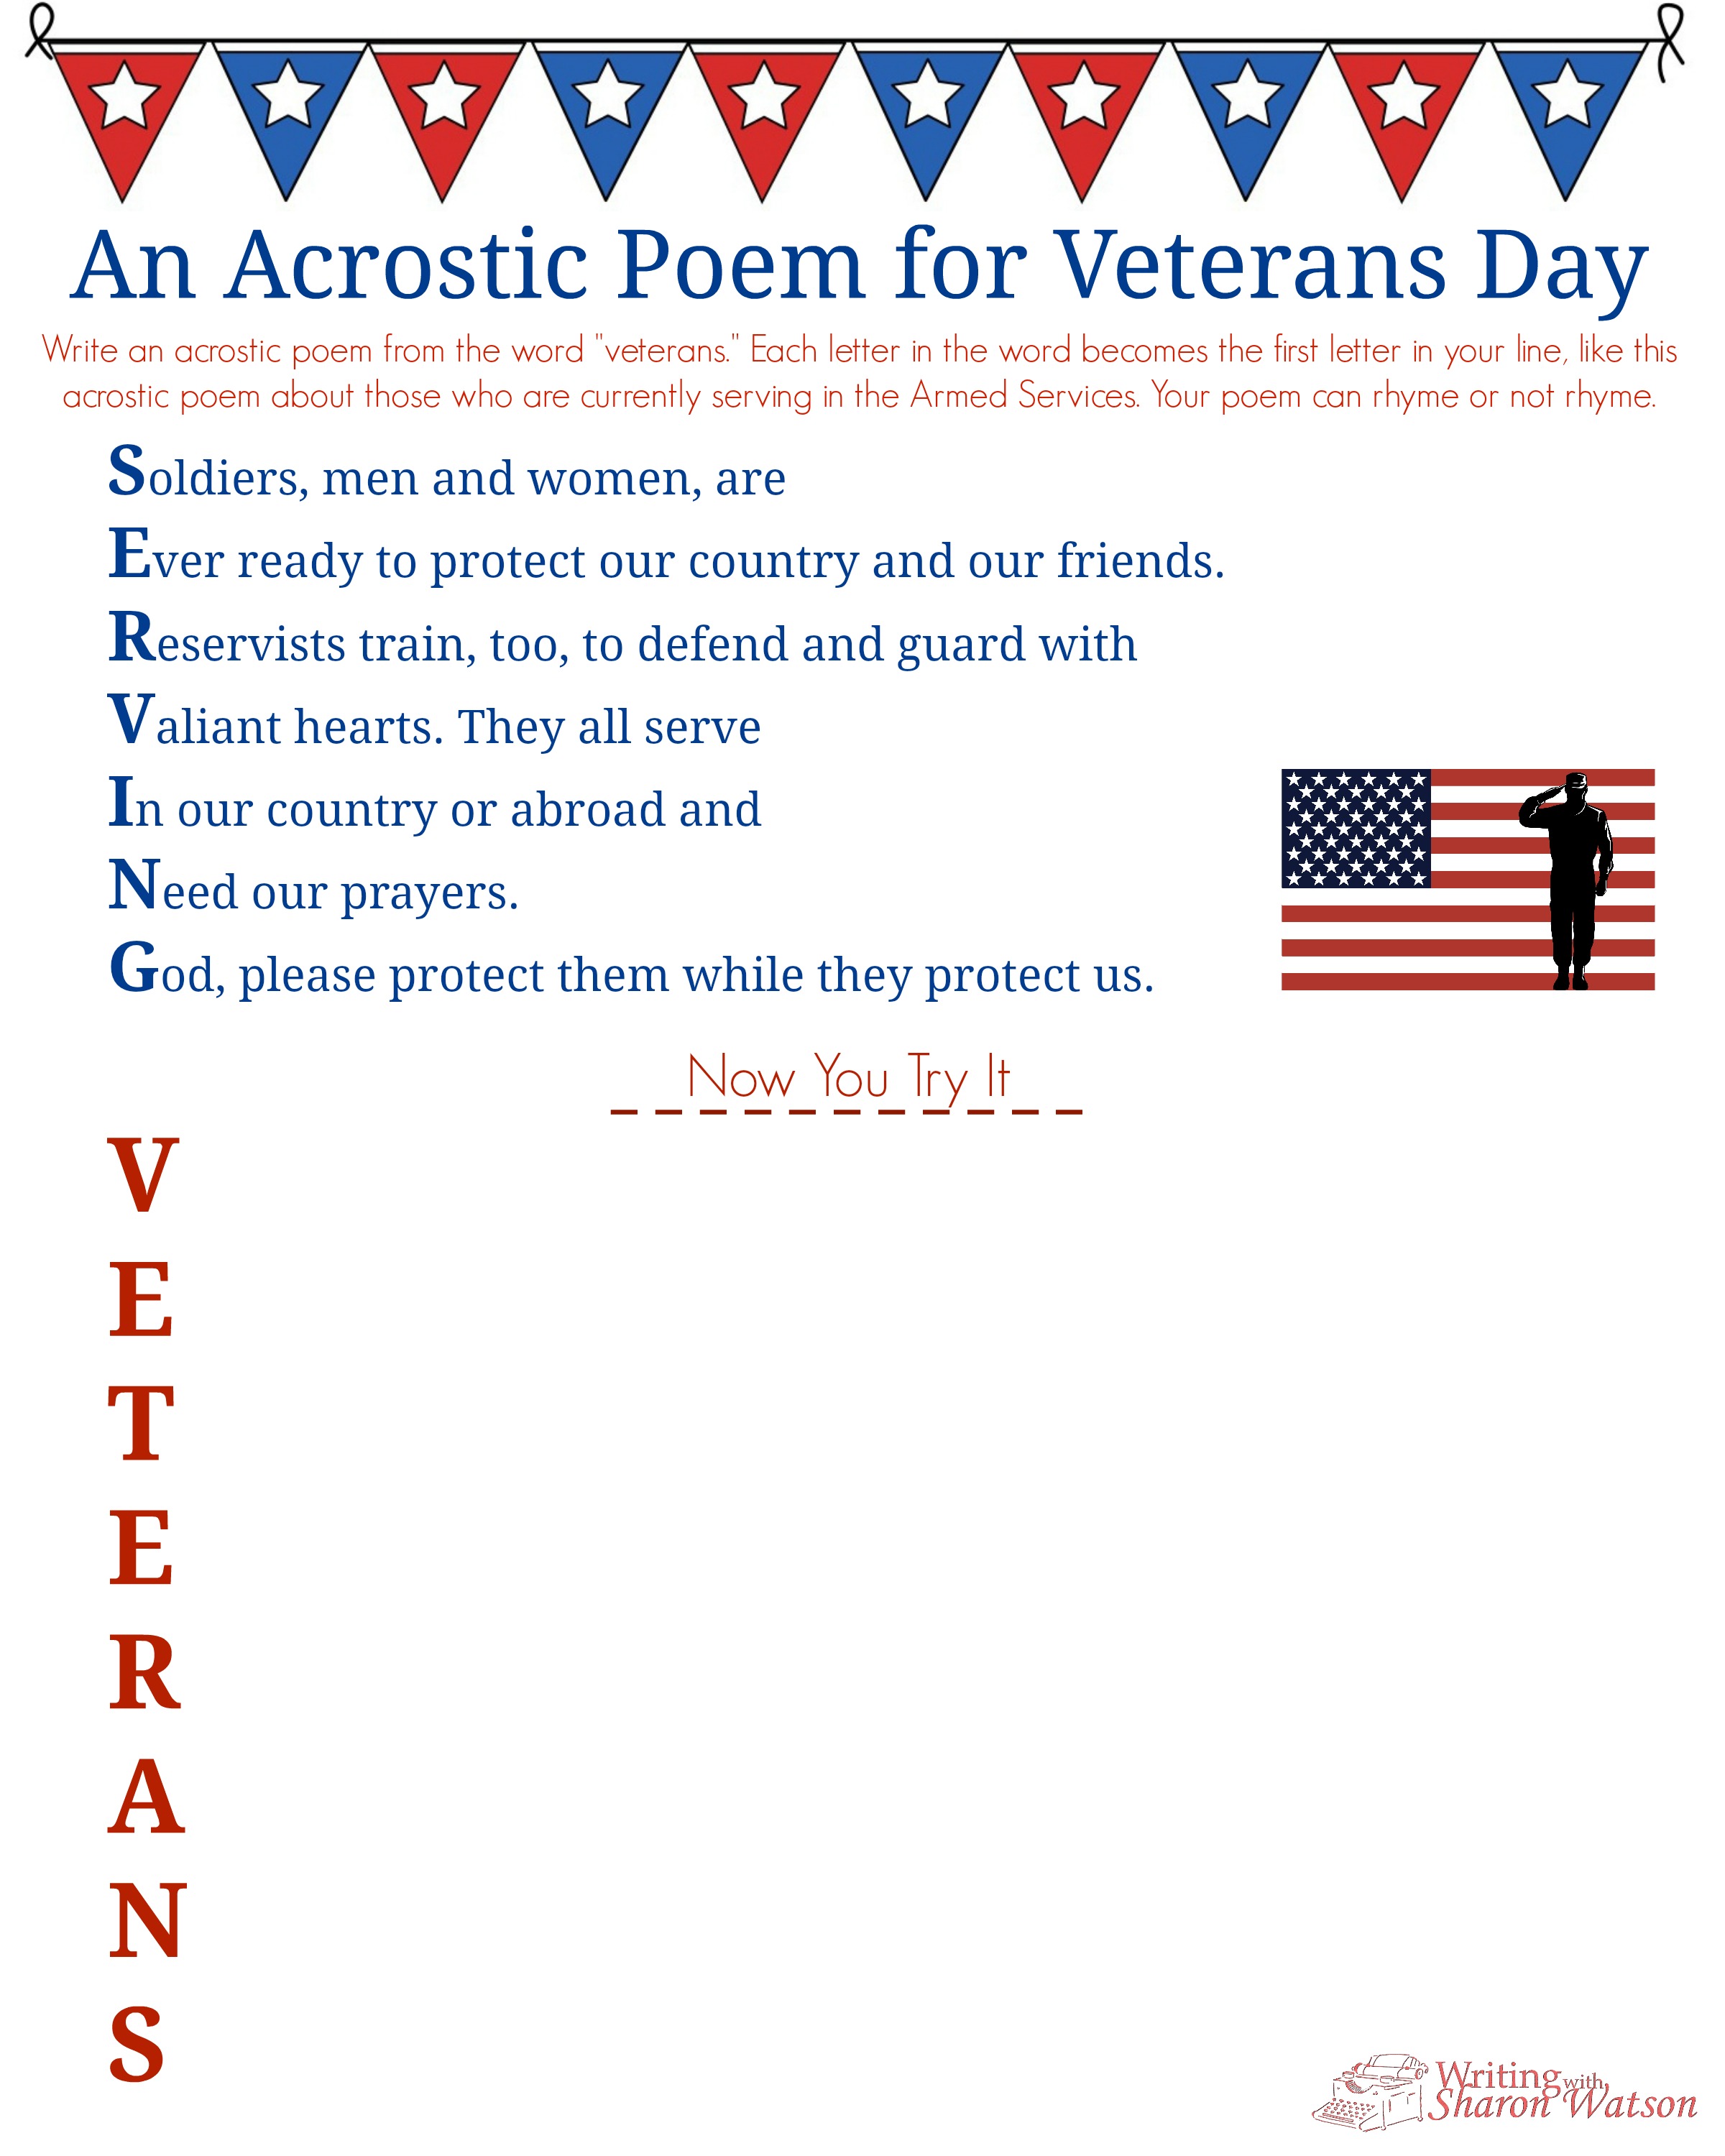 Veterans Day Acrostic Poem Image Writing With Sharon Watson Easy To